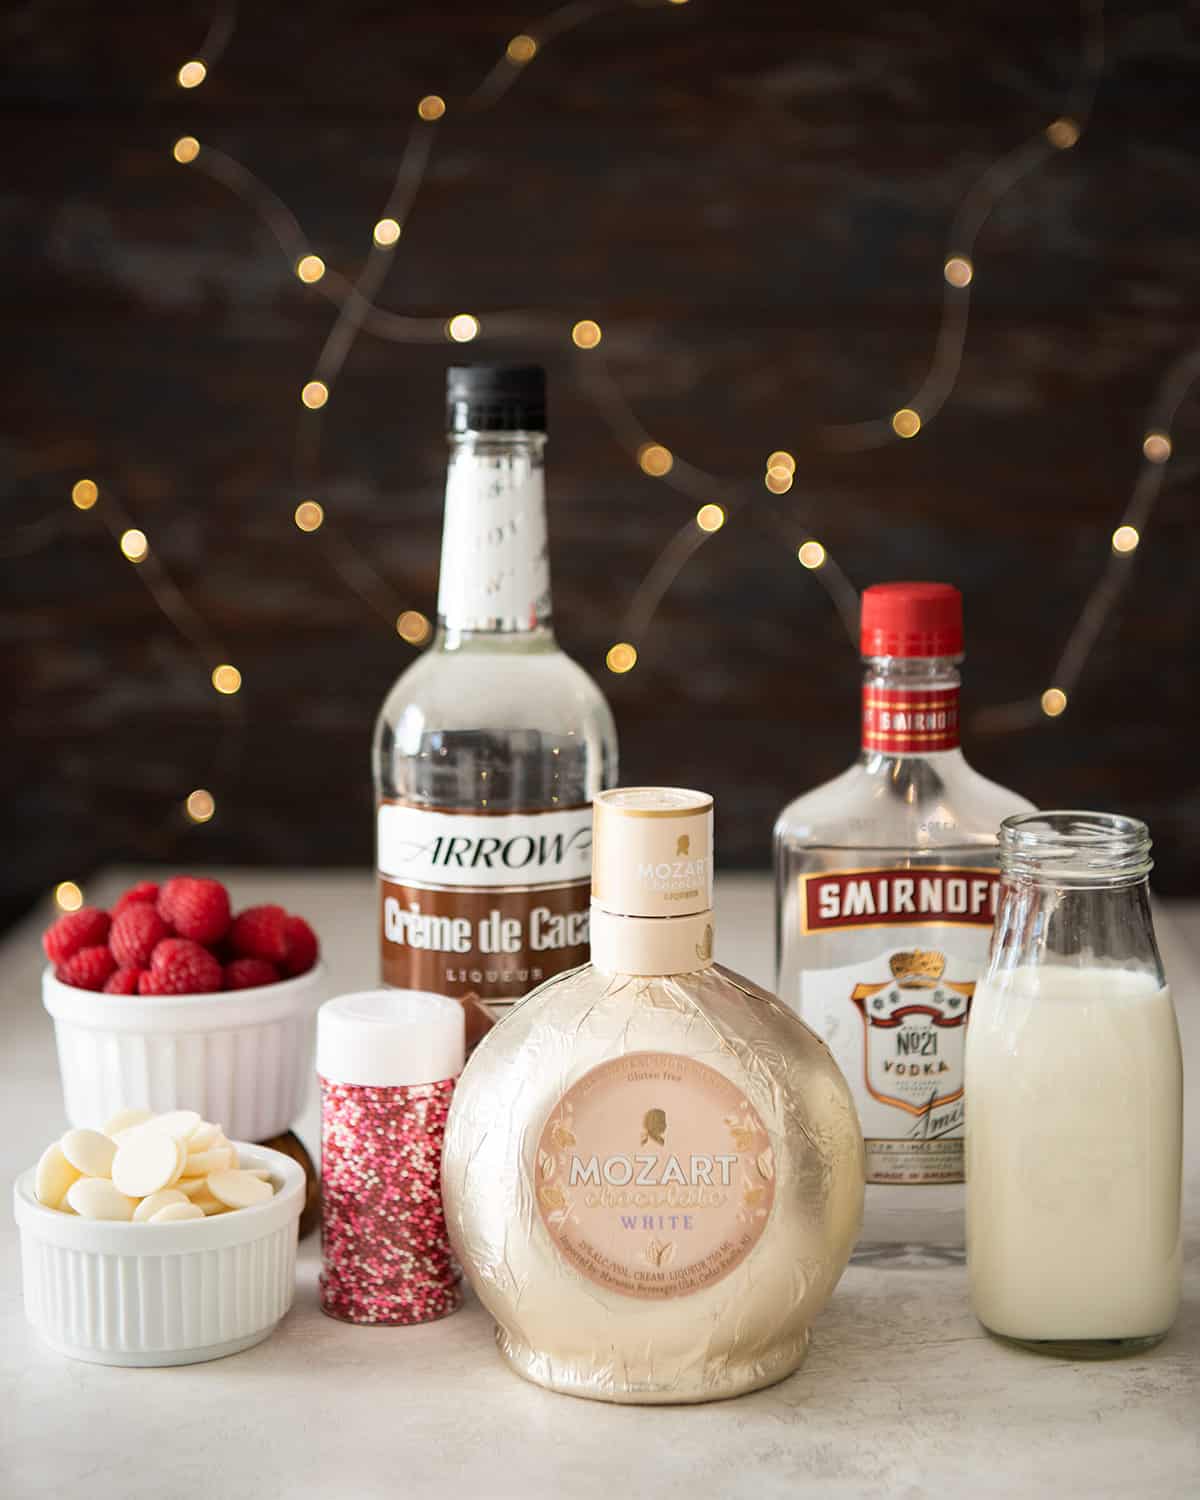 Ingredients to make a white chocolatini including bottles of vodka, Mozart White Chocolate Liqueur, Creme de cacao, white chocolate and raspberries.